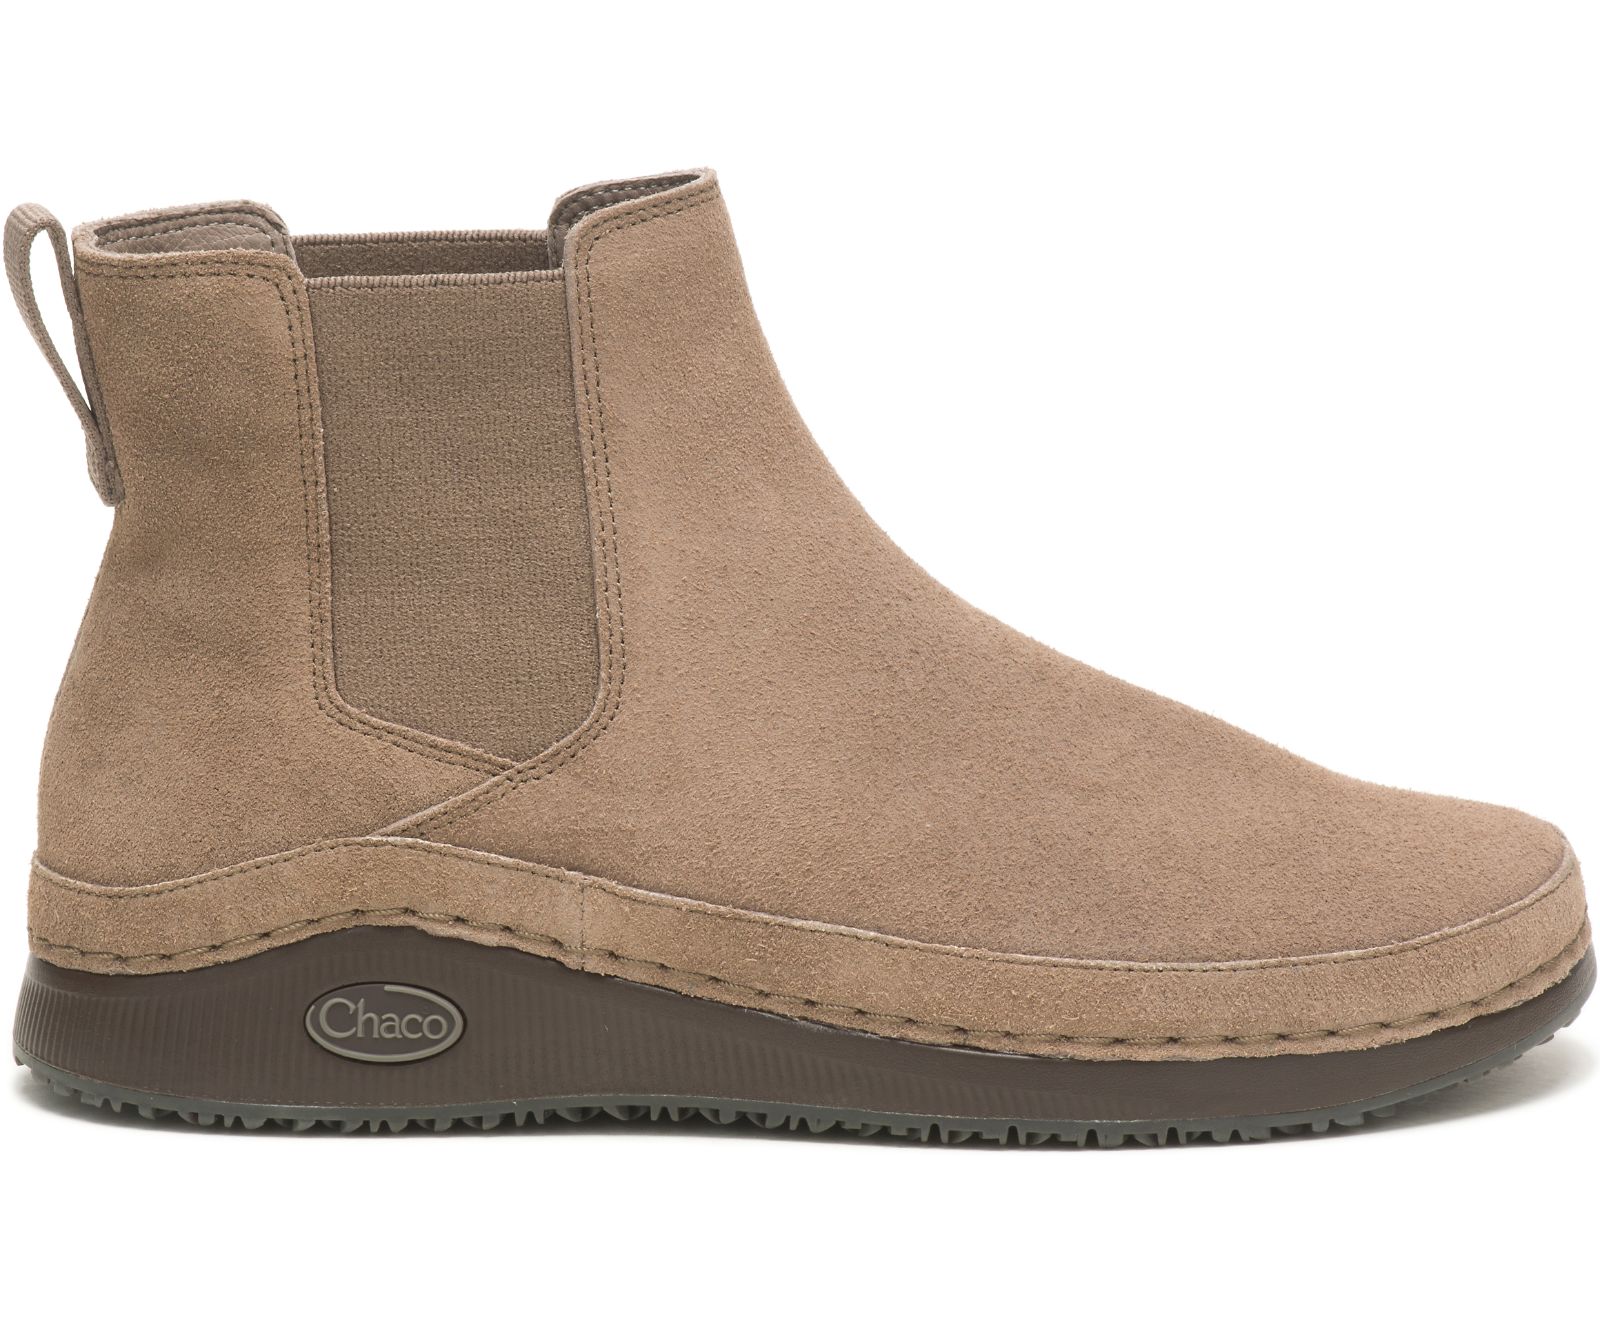 Chaco Paonia Chelsea Stiefel Braun | 24131B